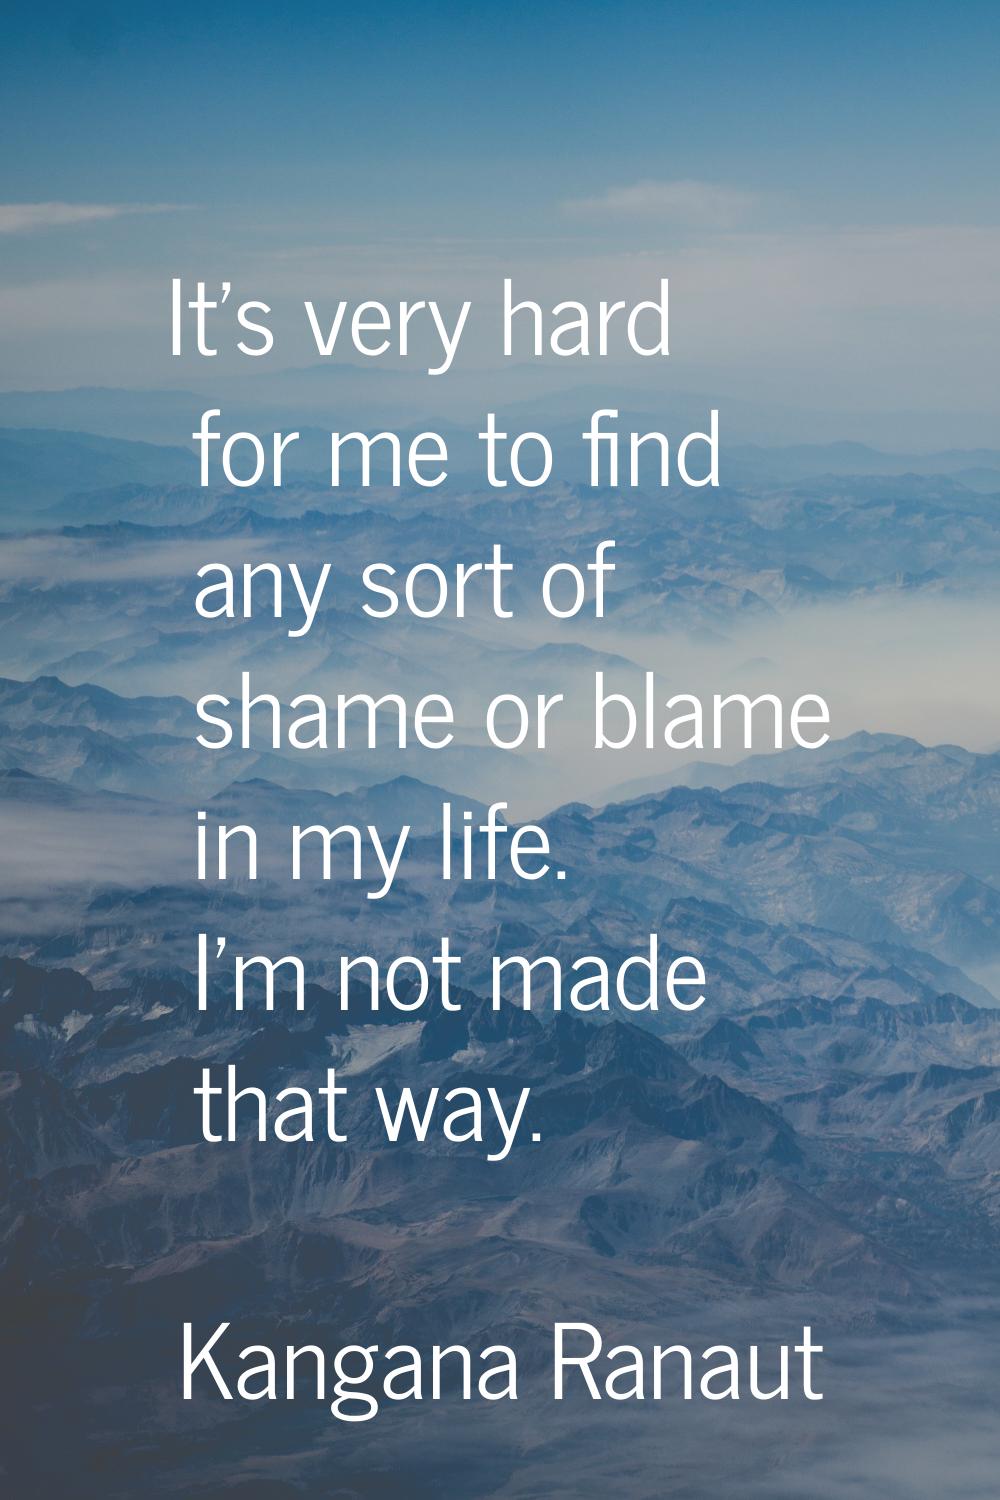 It's very hard for me to find any sort of shame or blame in my life. I'm not made that way.